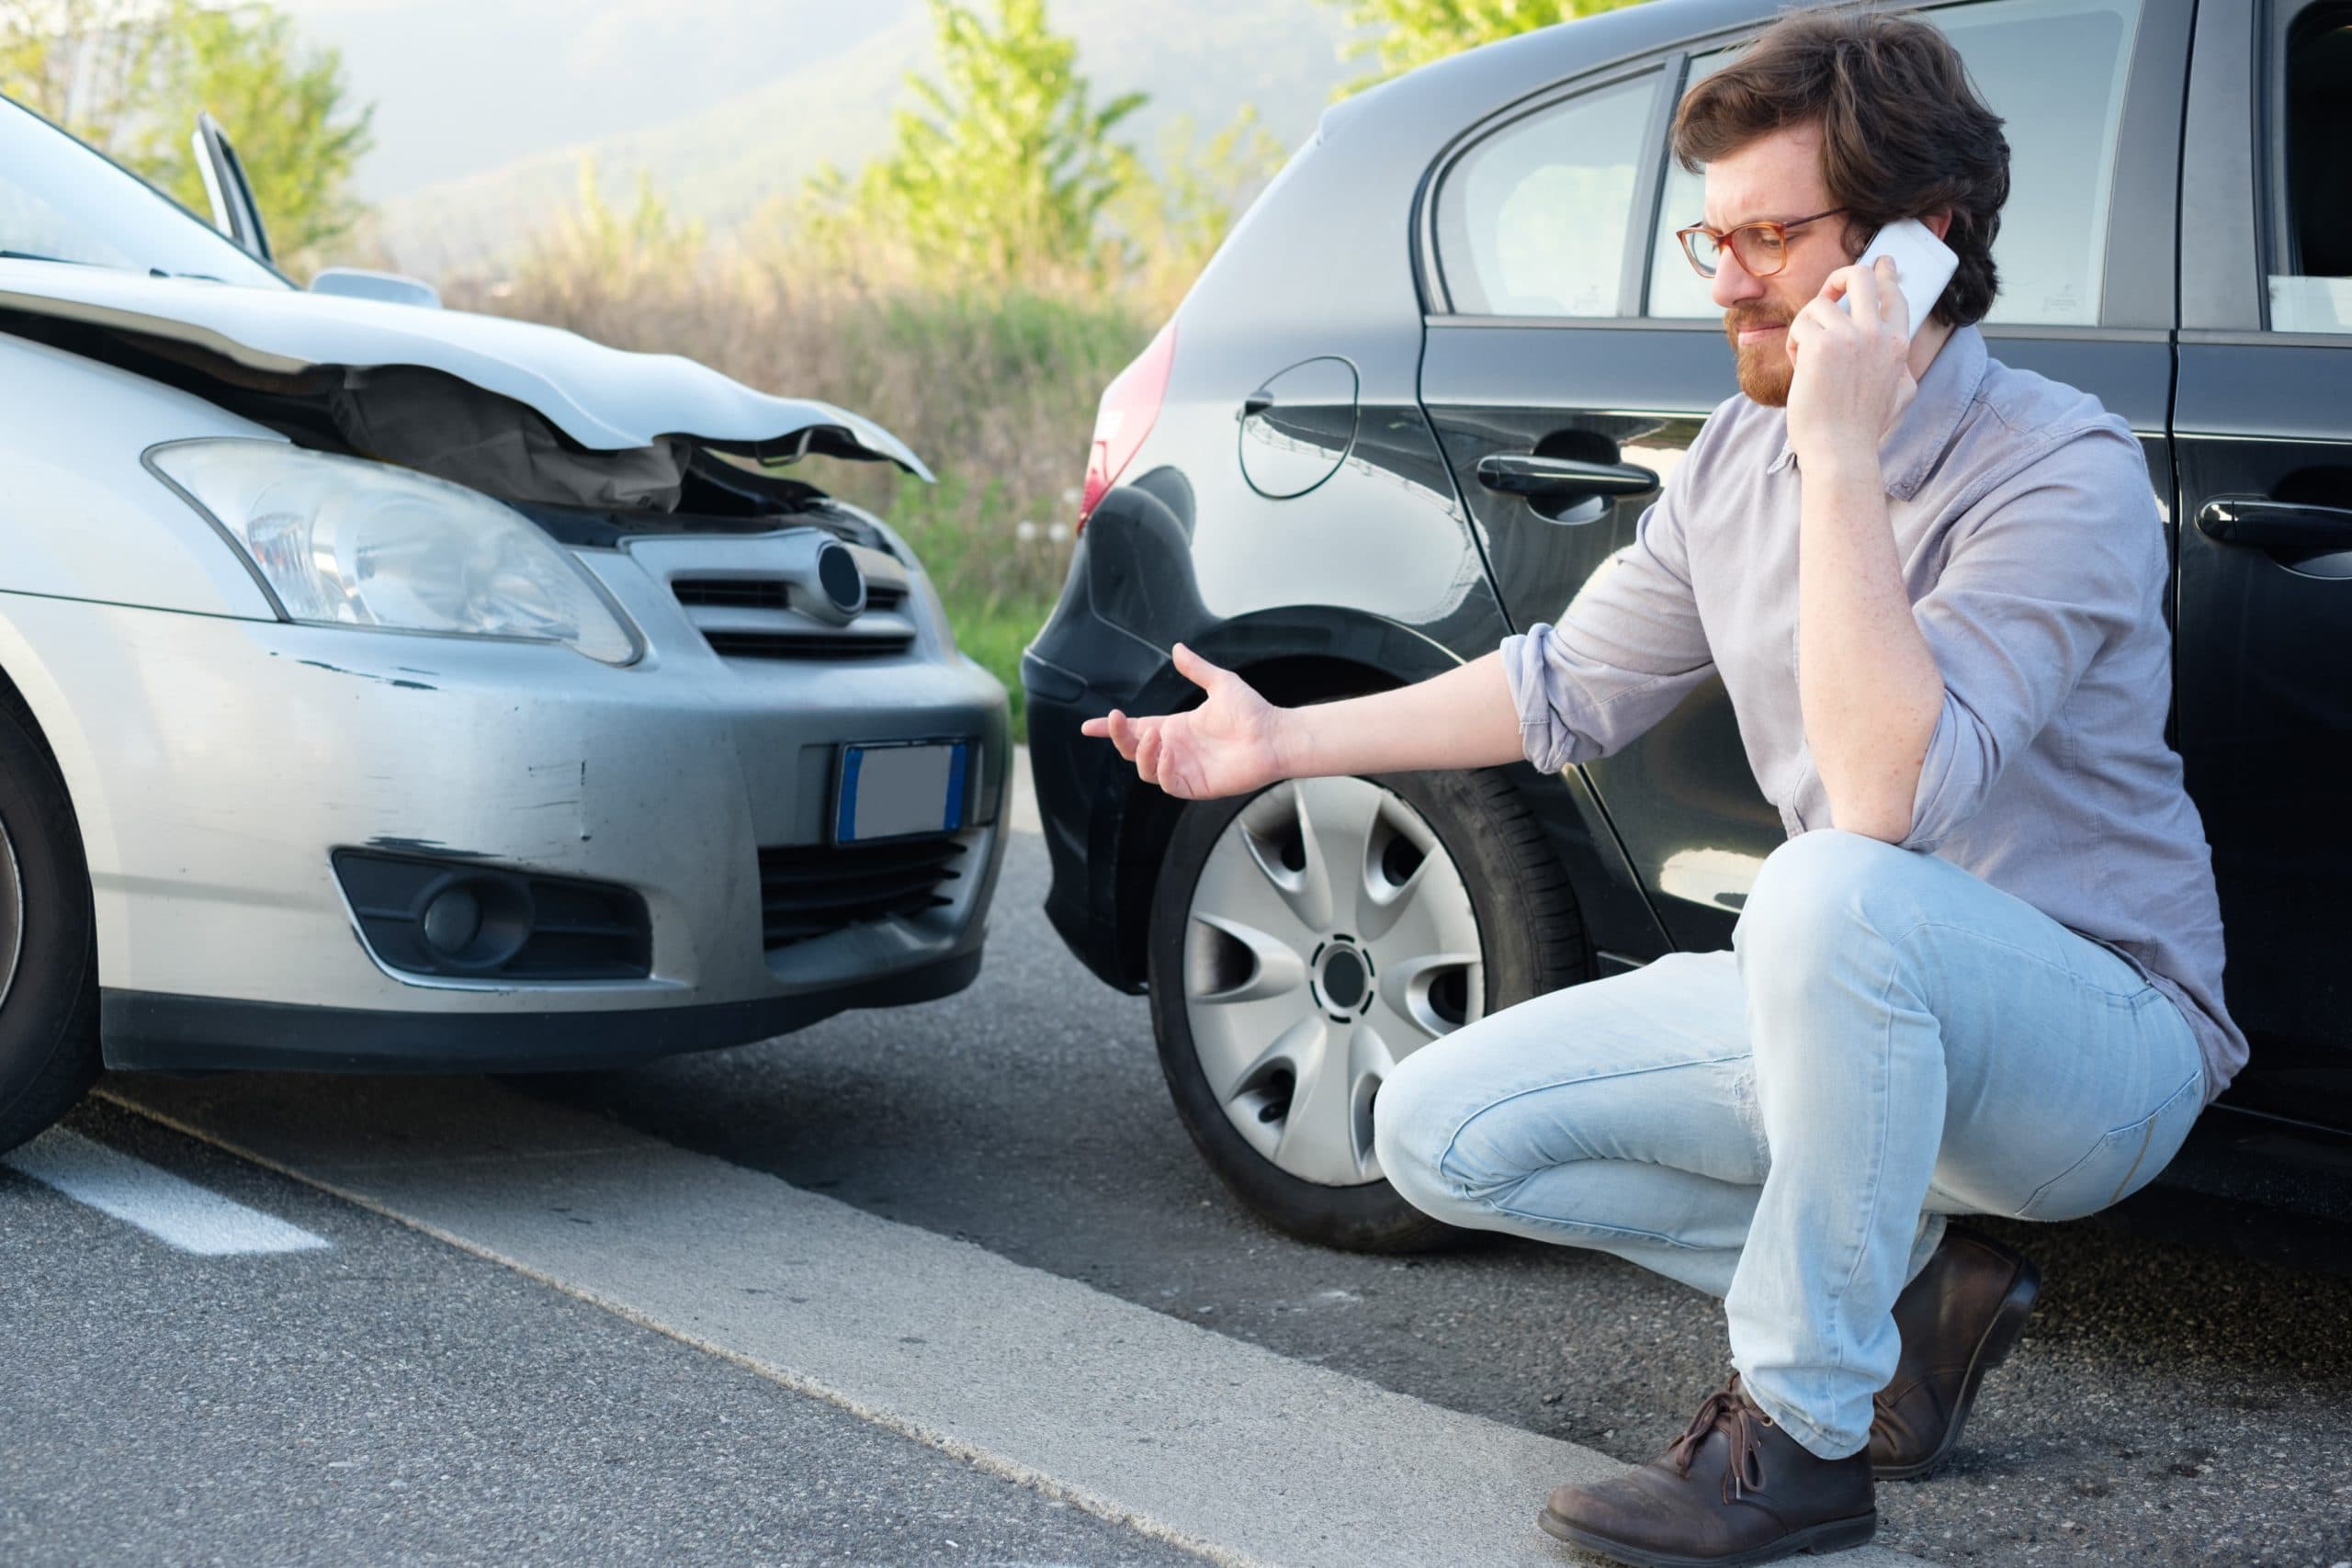 Do I Need To Call Police After a Minor Accident?